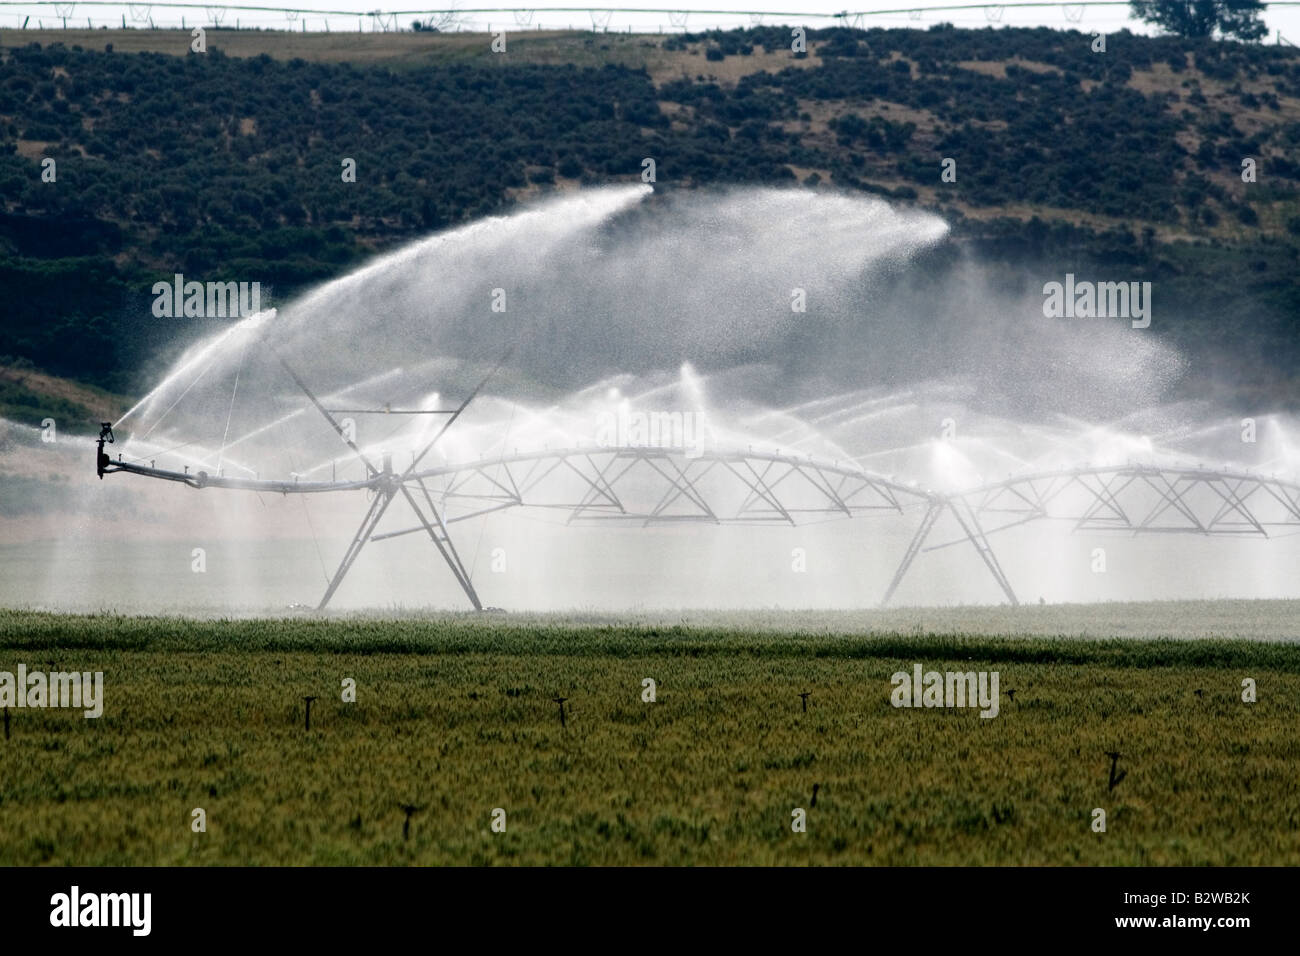 Sprinkler irrigation of a wheat field in Elmore County Idaho Stock Photo